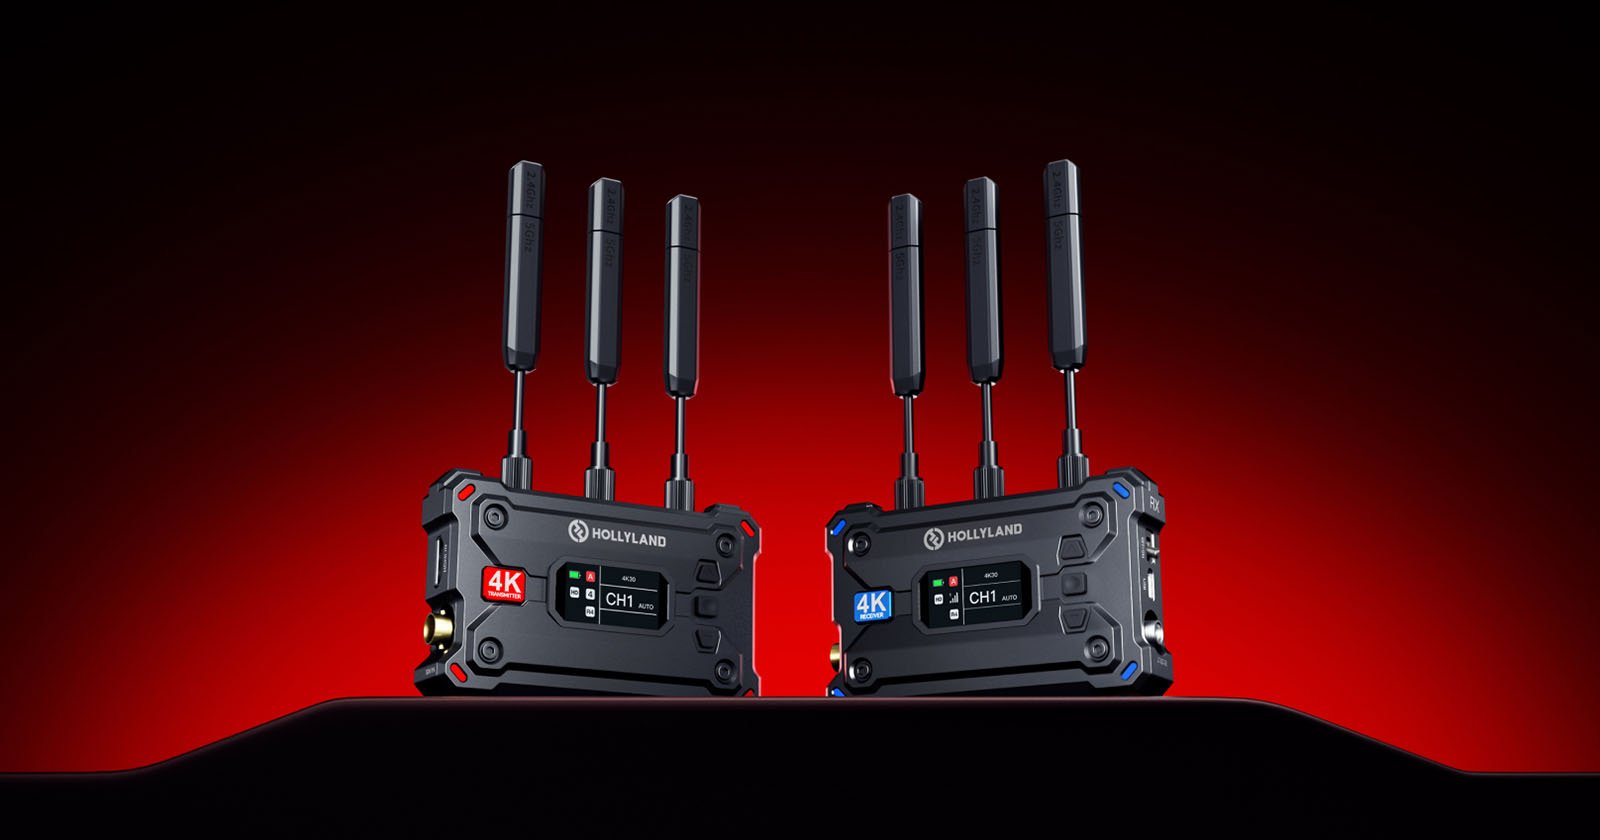 Two Hollyland video transmission devices with antennas stand on a black surface against a red and black gradient background. They feature digital screens displaying "4K" and channel information.